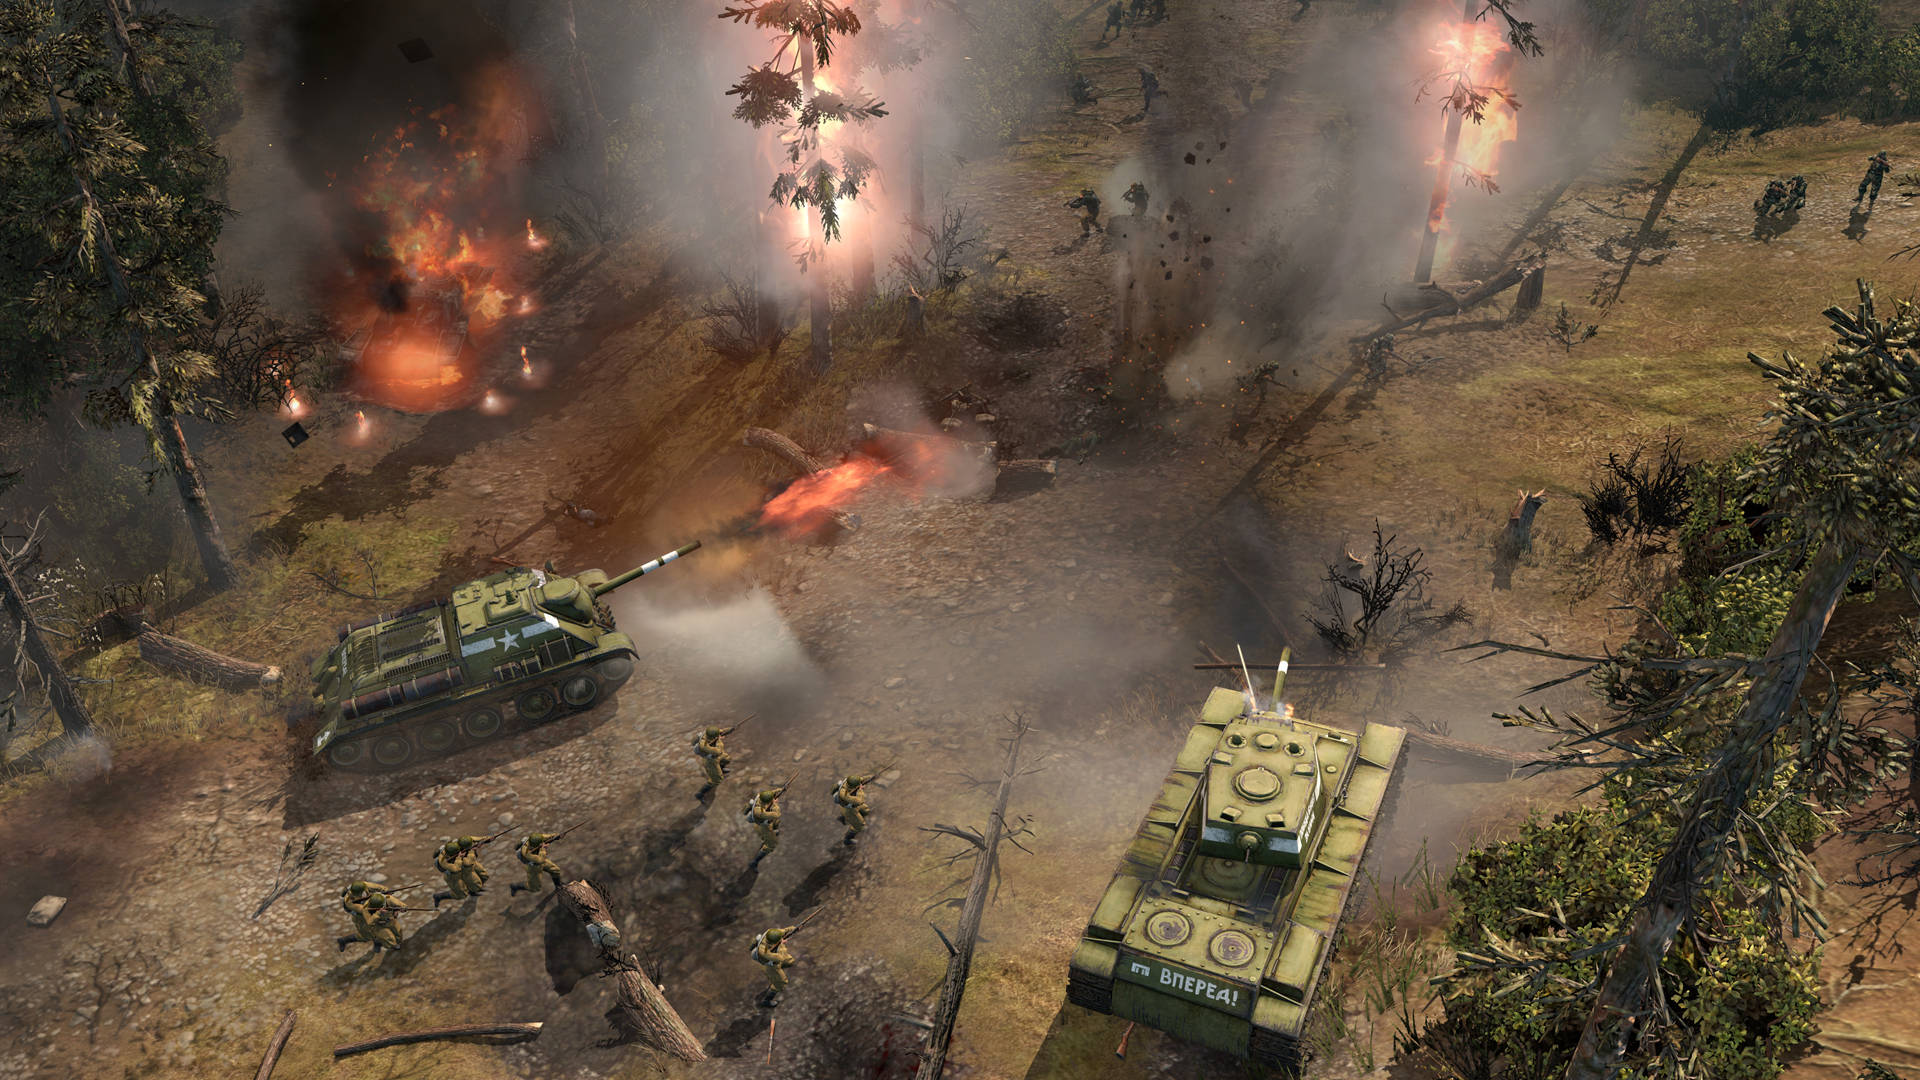 Company Of Heroes 2 Burning Trees Background